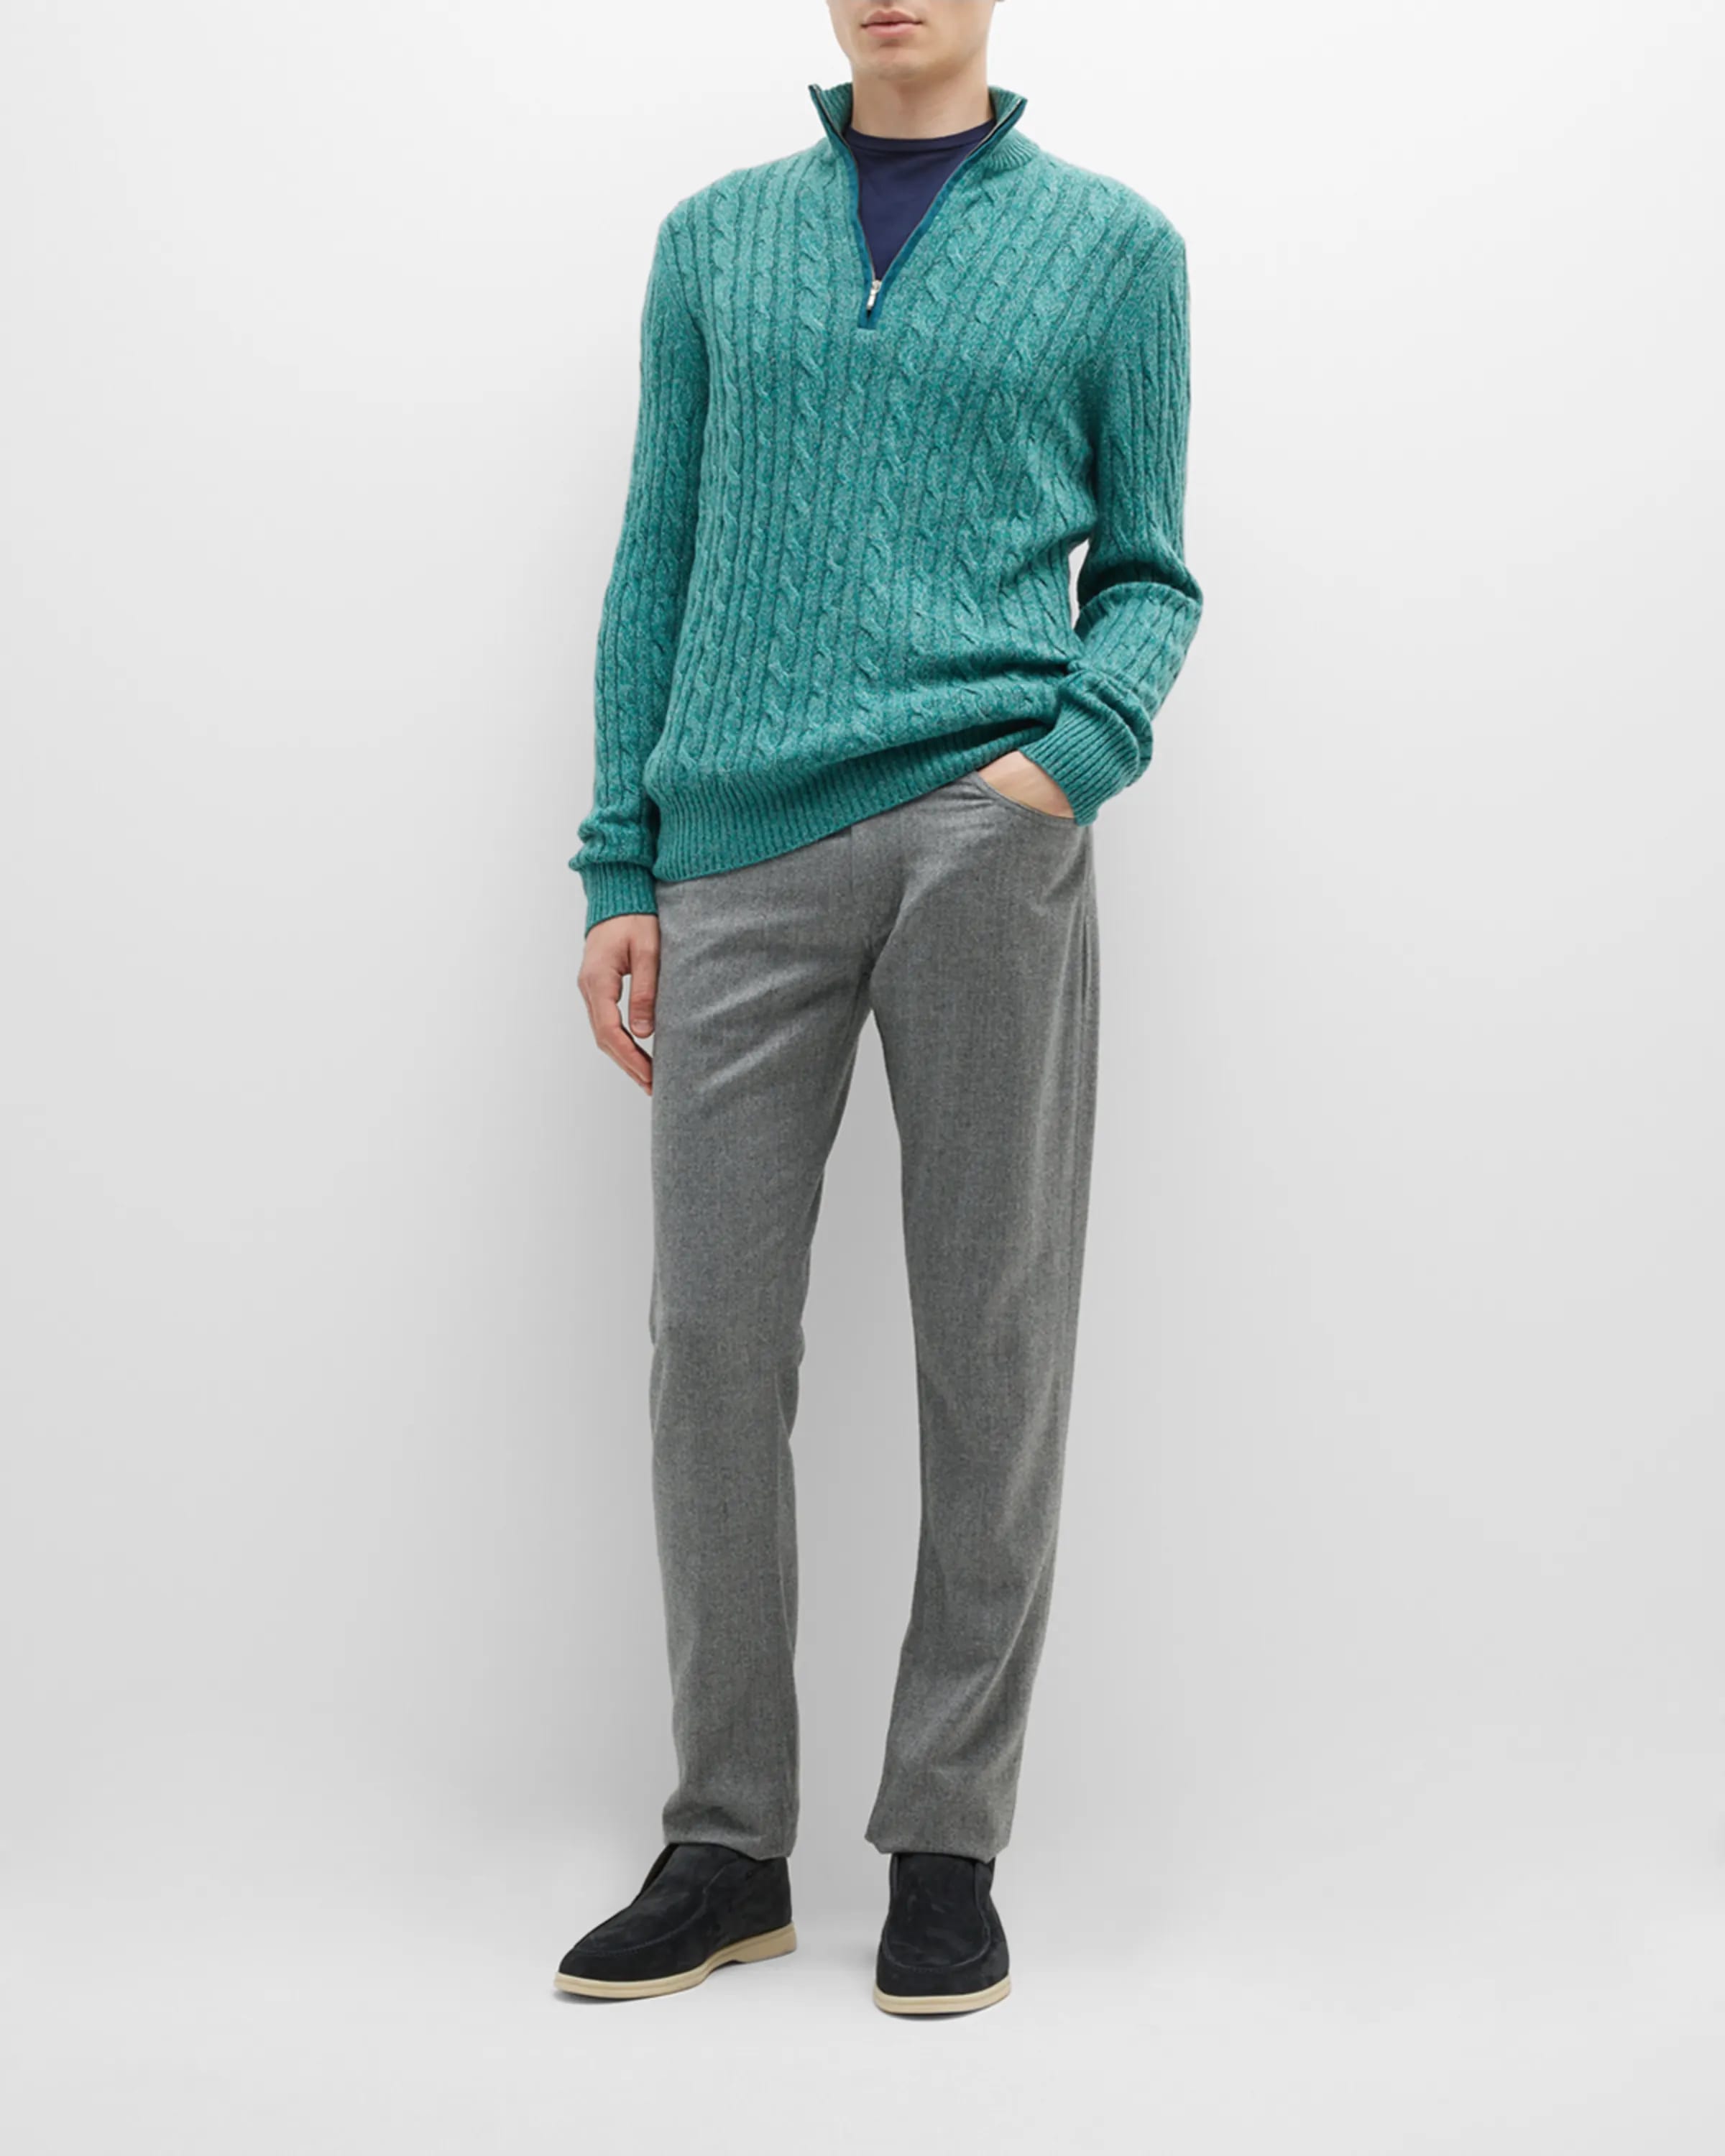 The Hunt For The Best Men’s Cable-Knit Sweater